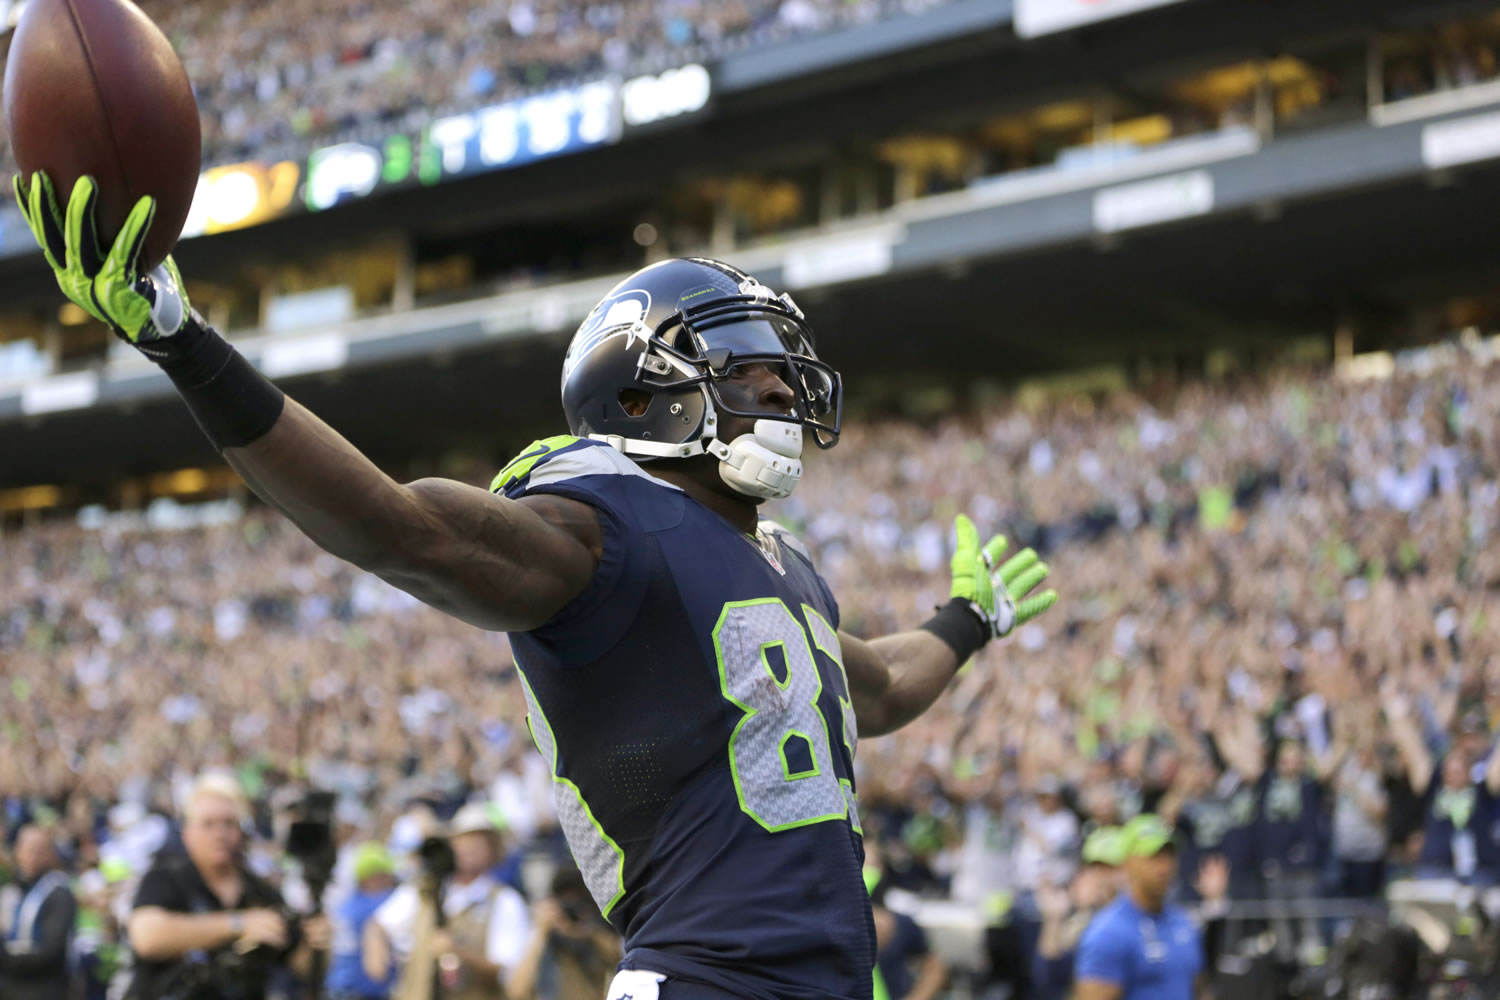 Seattle Seahawks wide receiver Ricardo Lockette celebrates after his touchdown against the Green Bay Packers on Thursday, Sept. 4, 2014, in Seattle.